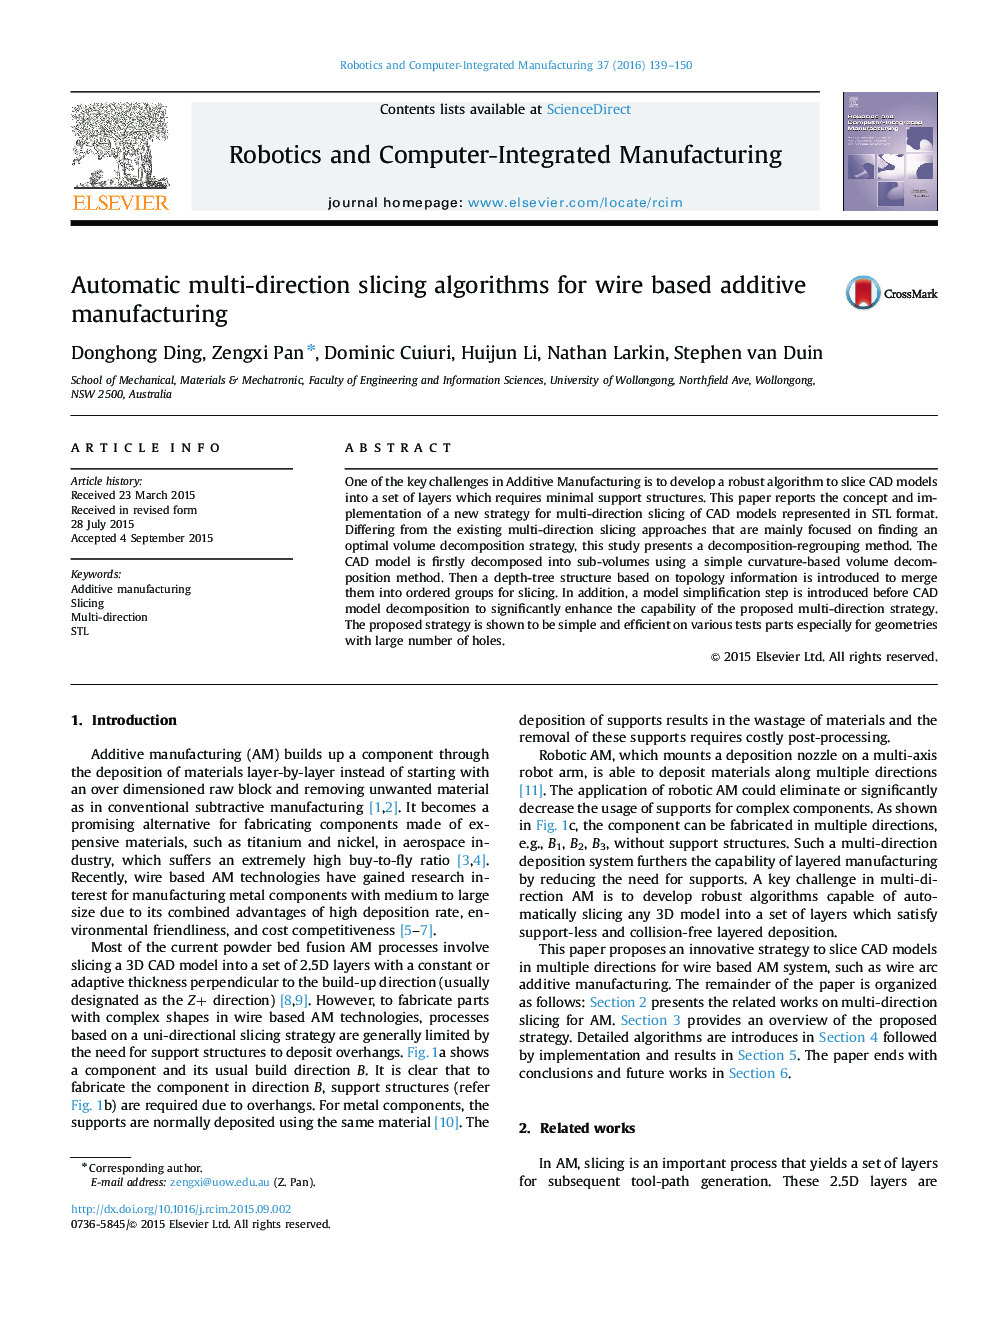 Automatic multi-direction slicing algorithms for wire based additive manufacturing